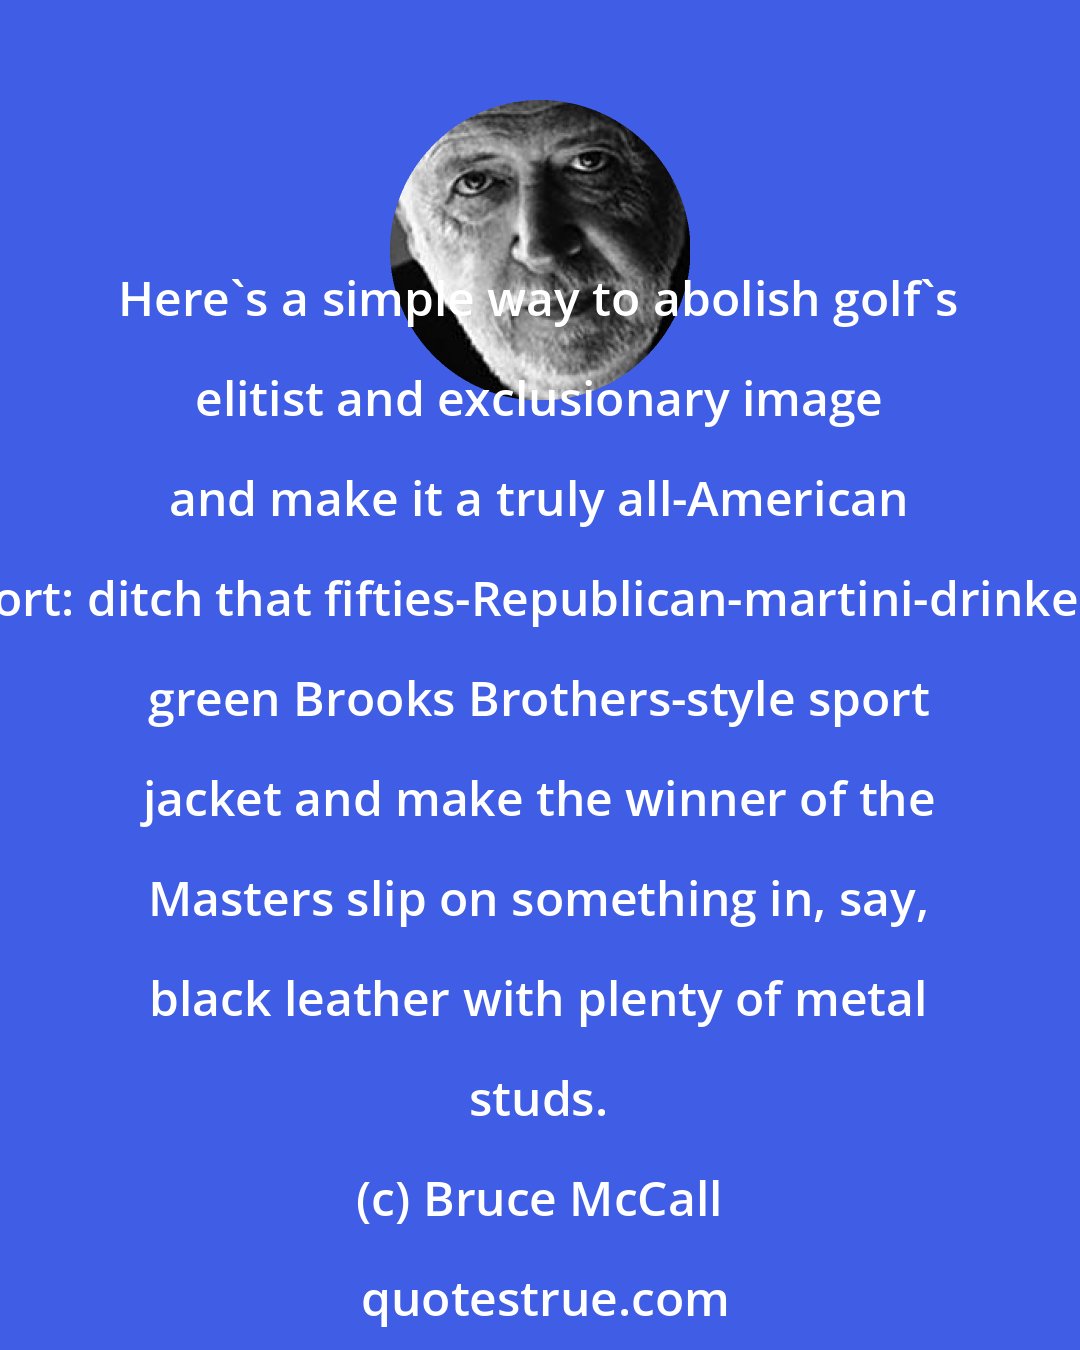 Bruce McCall: Here's a simple way to abolish golf's elitist and exclusionary image and make it a truly all-American sport: ditch that fifties-Republican-martini-drinker's green Brooks Brothers-style sport jacket and make the winner of the Masters slip on something in, say, black leather with plenty of metal studs.